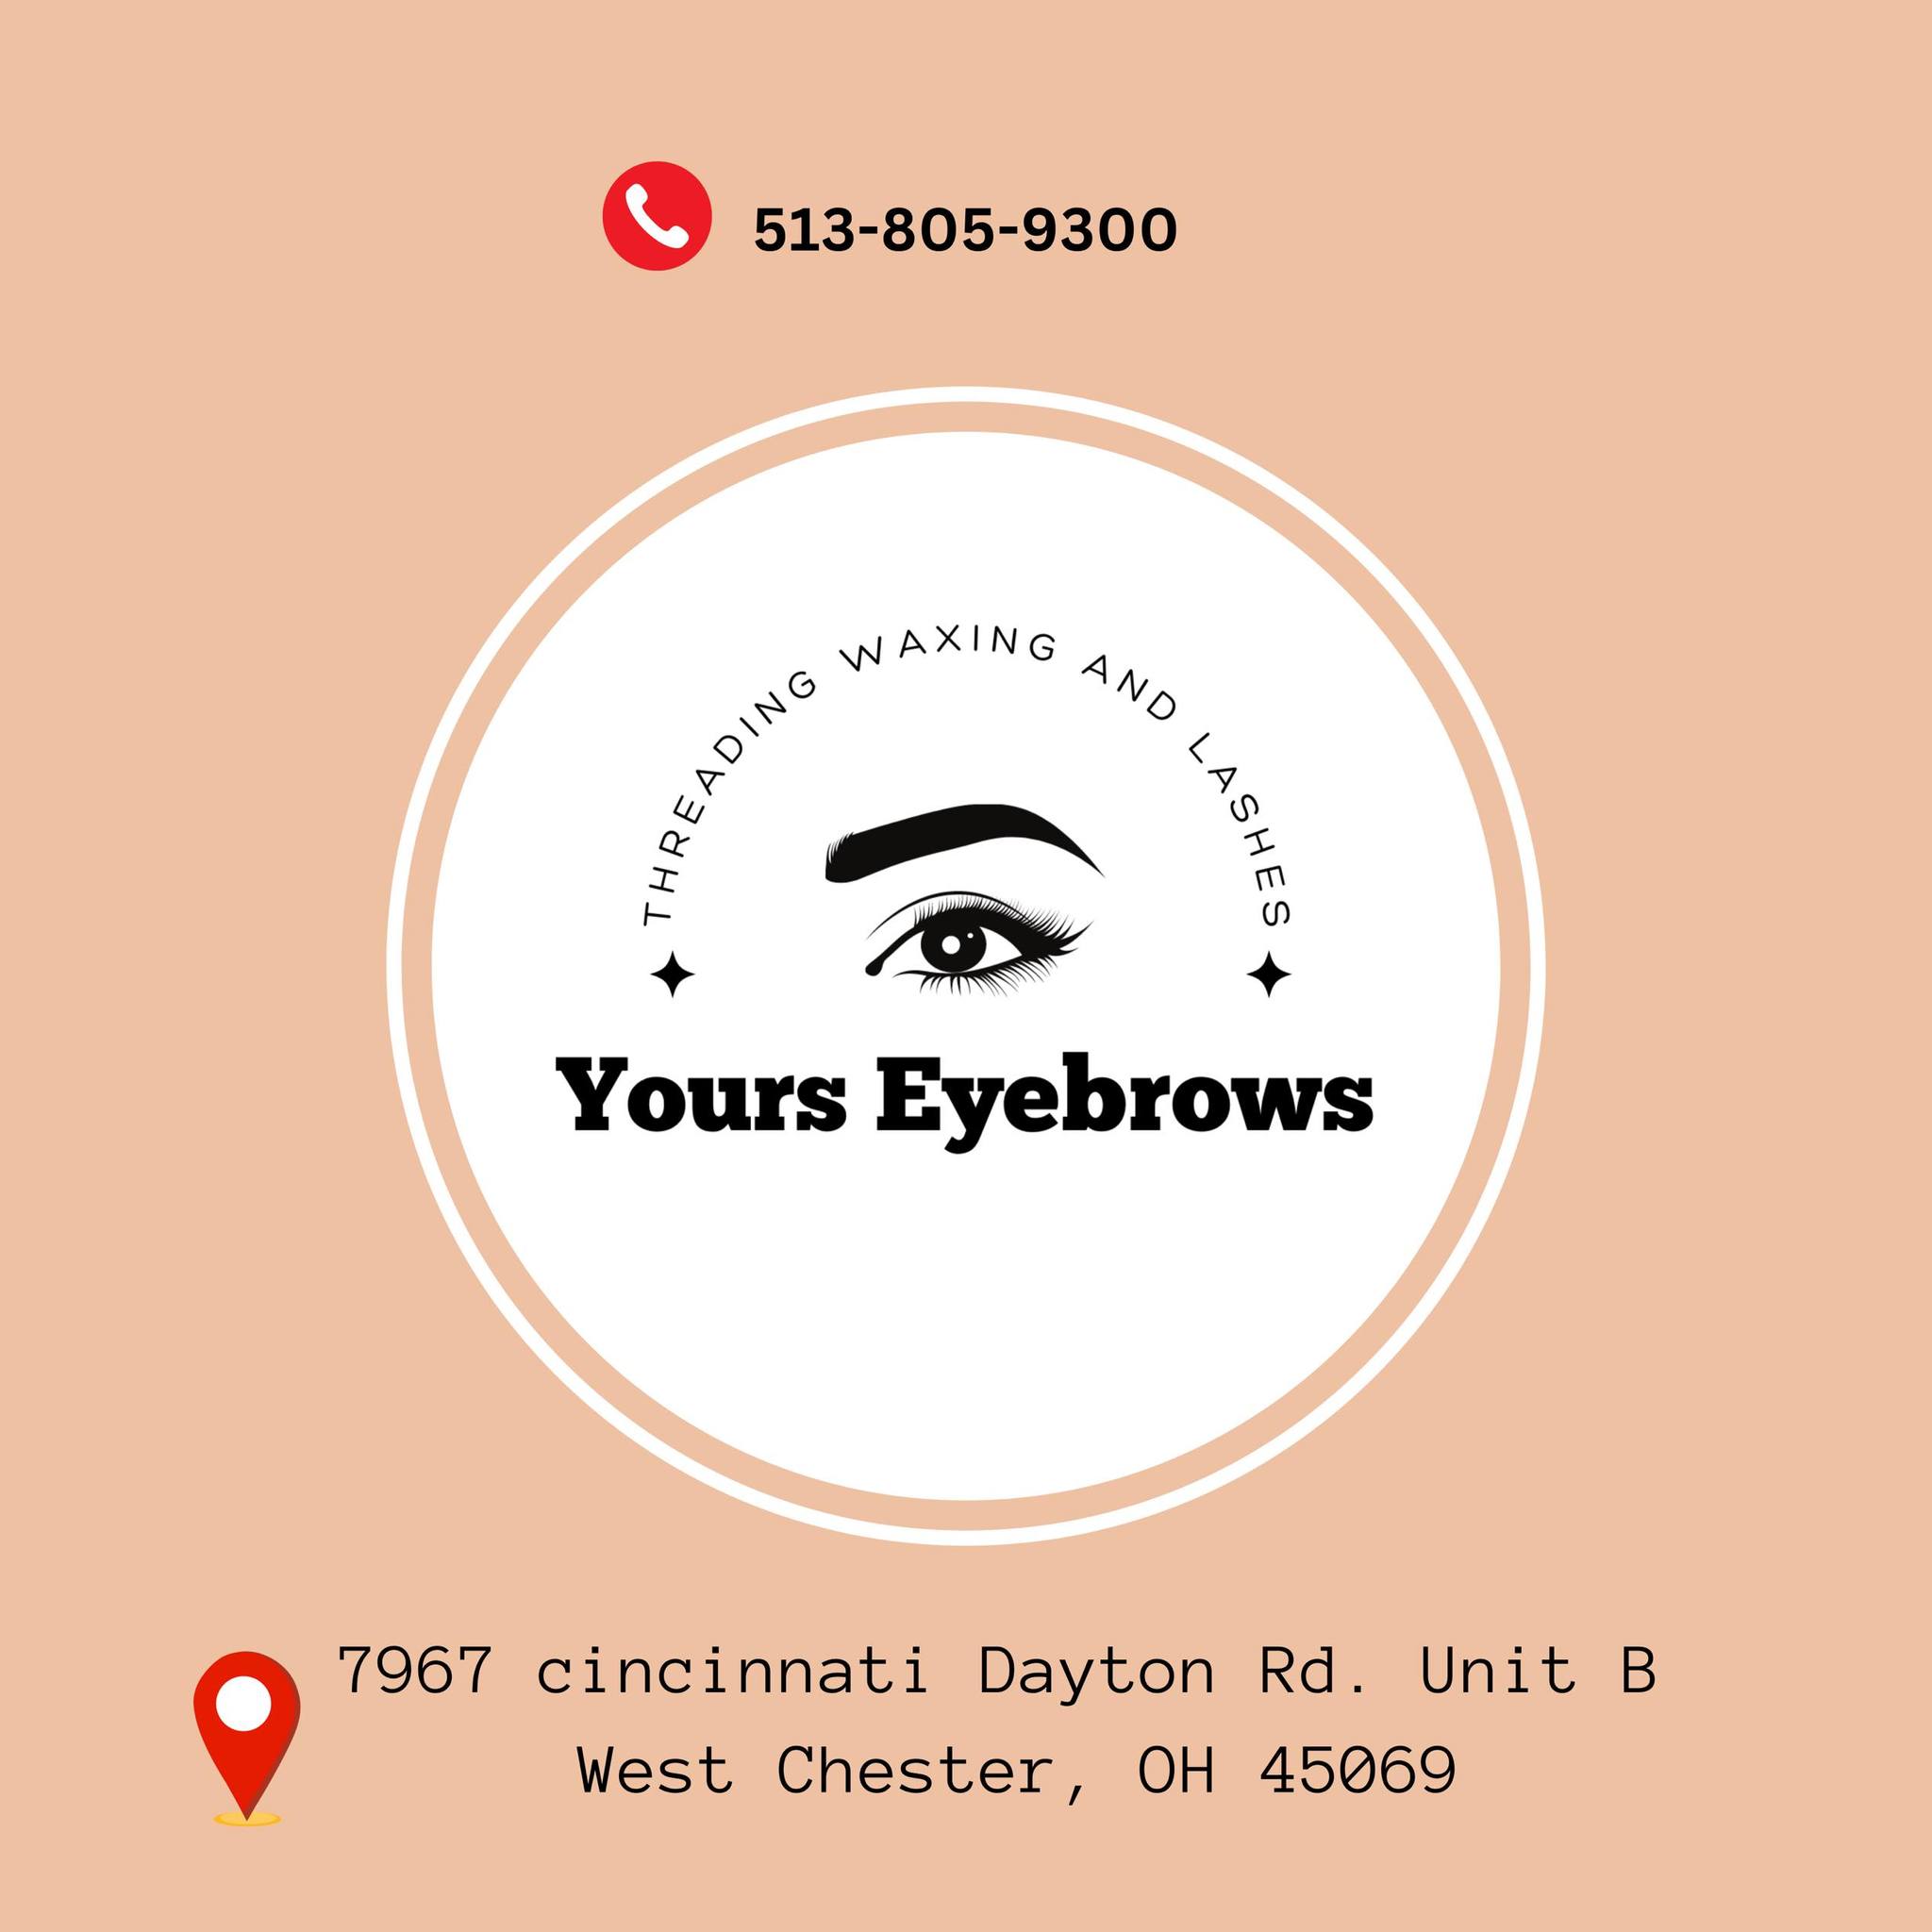 Yours Eyebrows